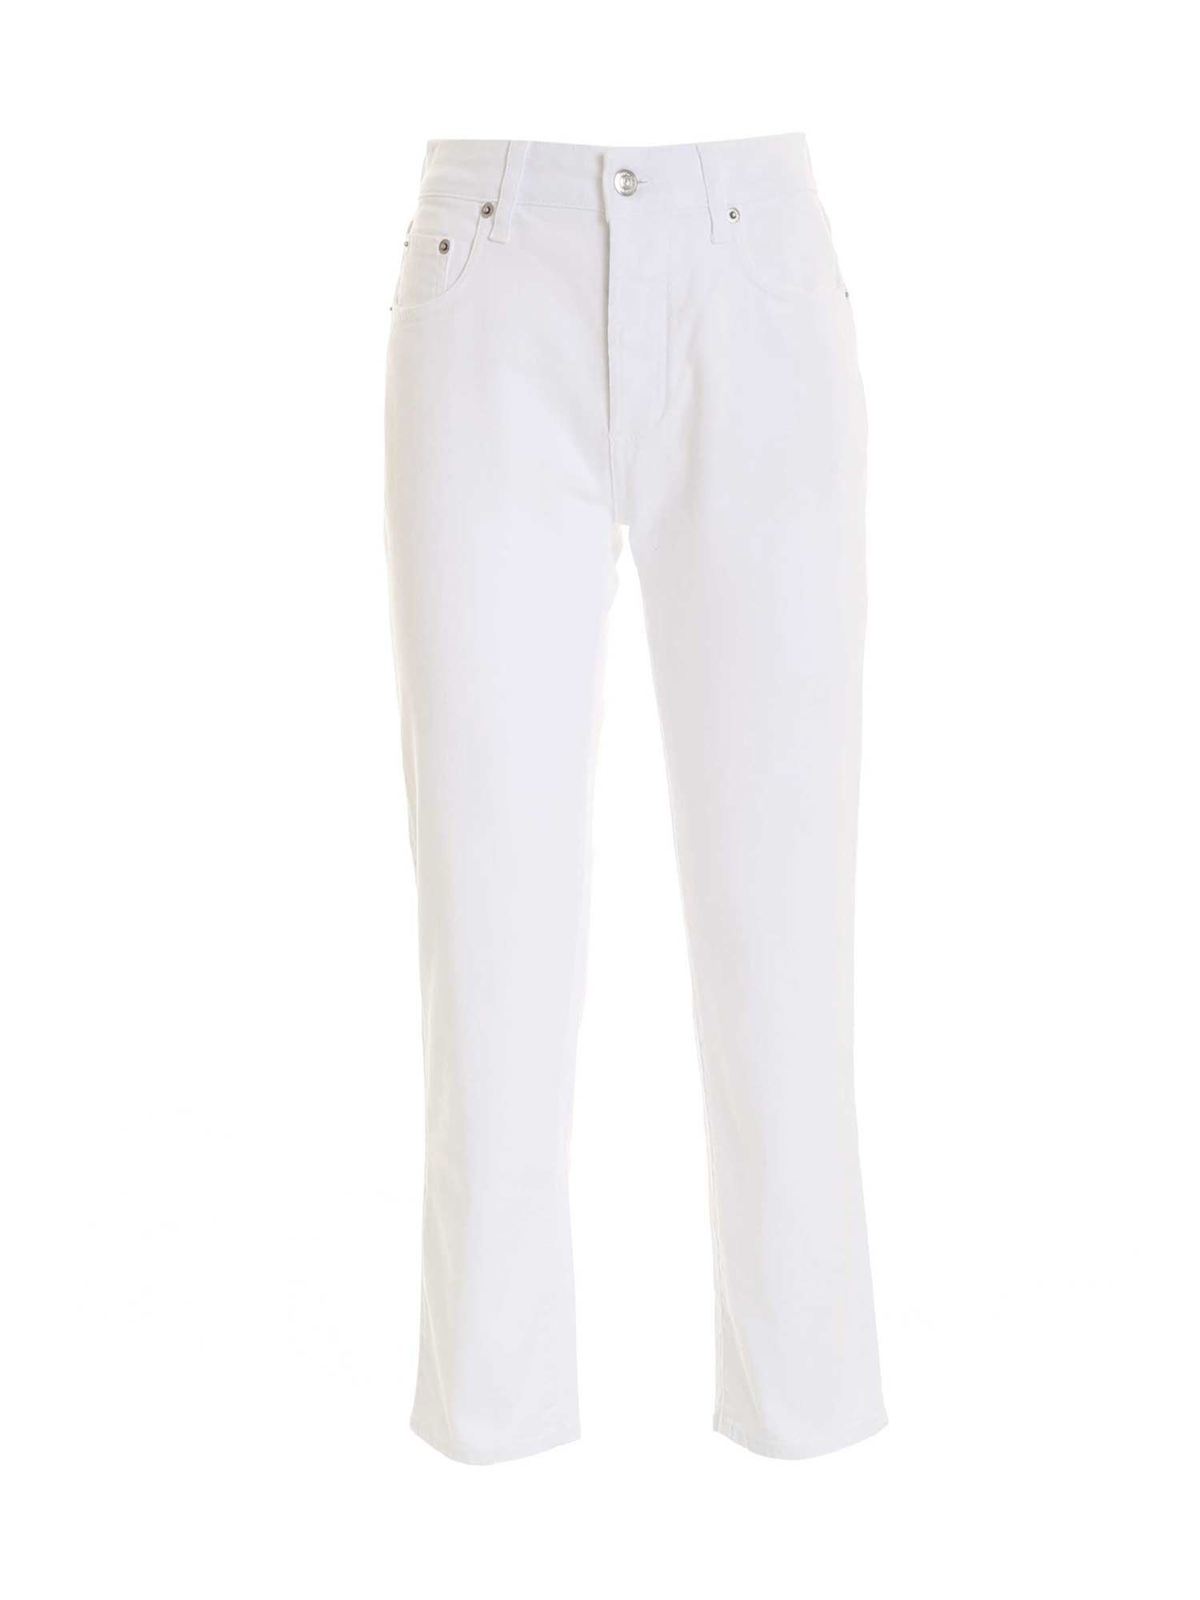 DEPARTMENT 5 CARMA PANTS IN WHITE